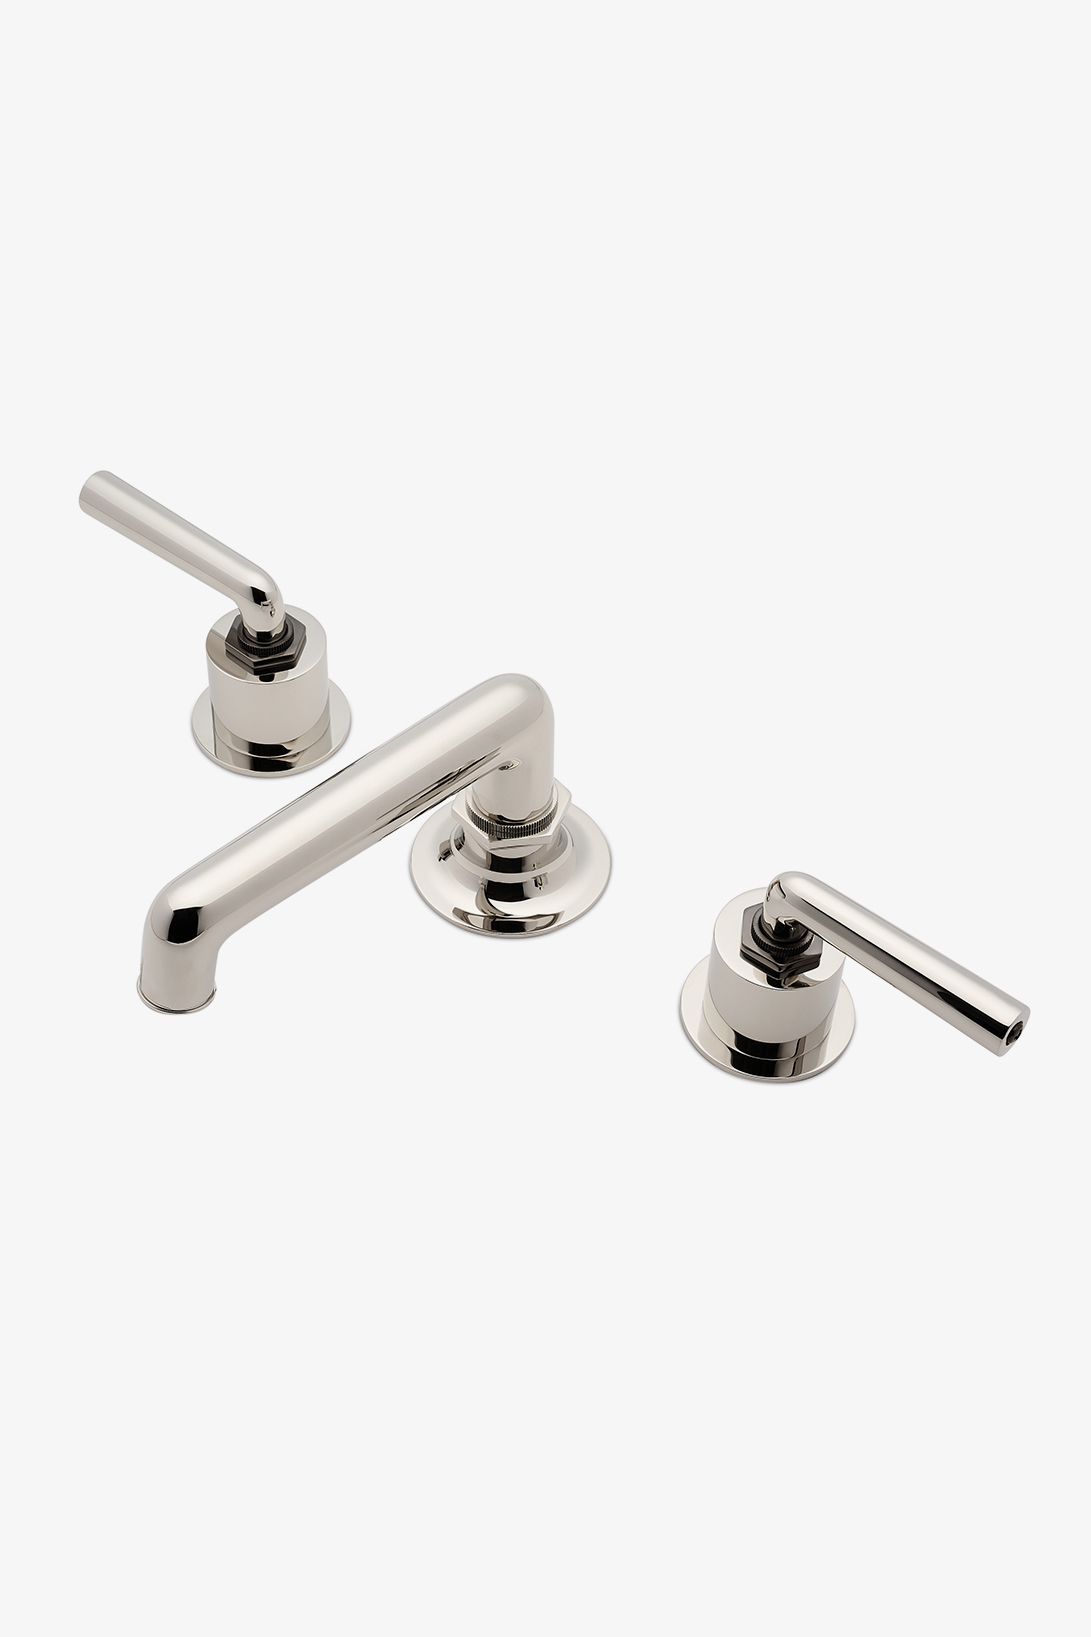 Henry Lavatory Faucet Two Tone Lever